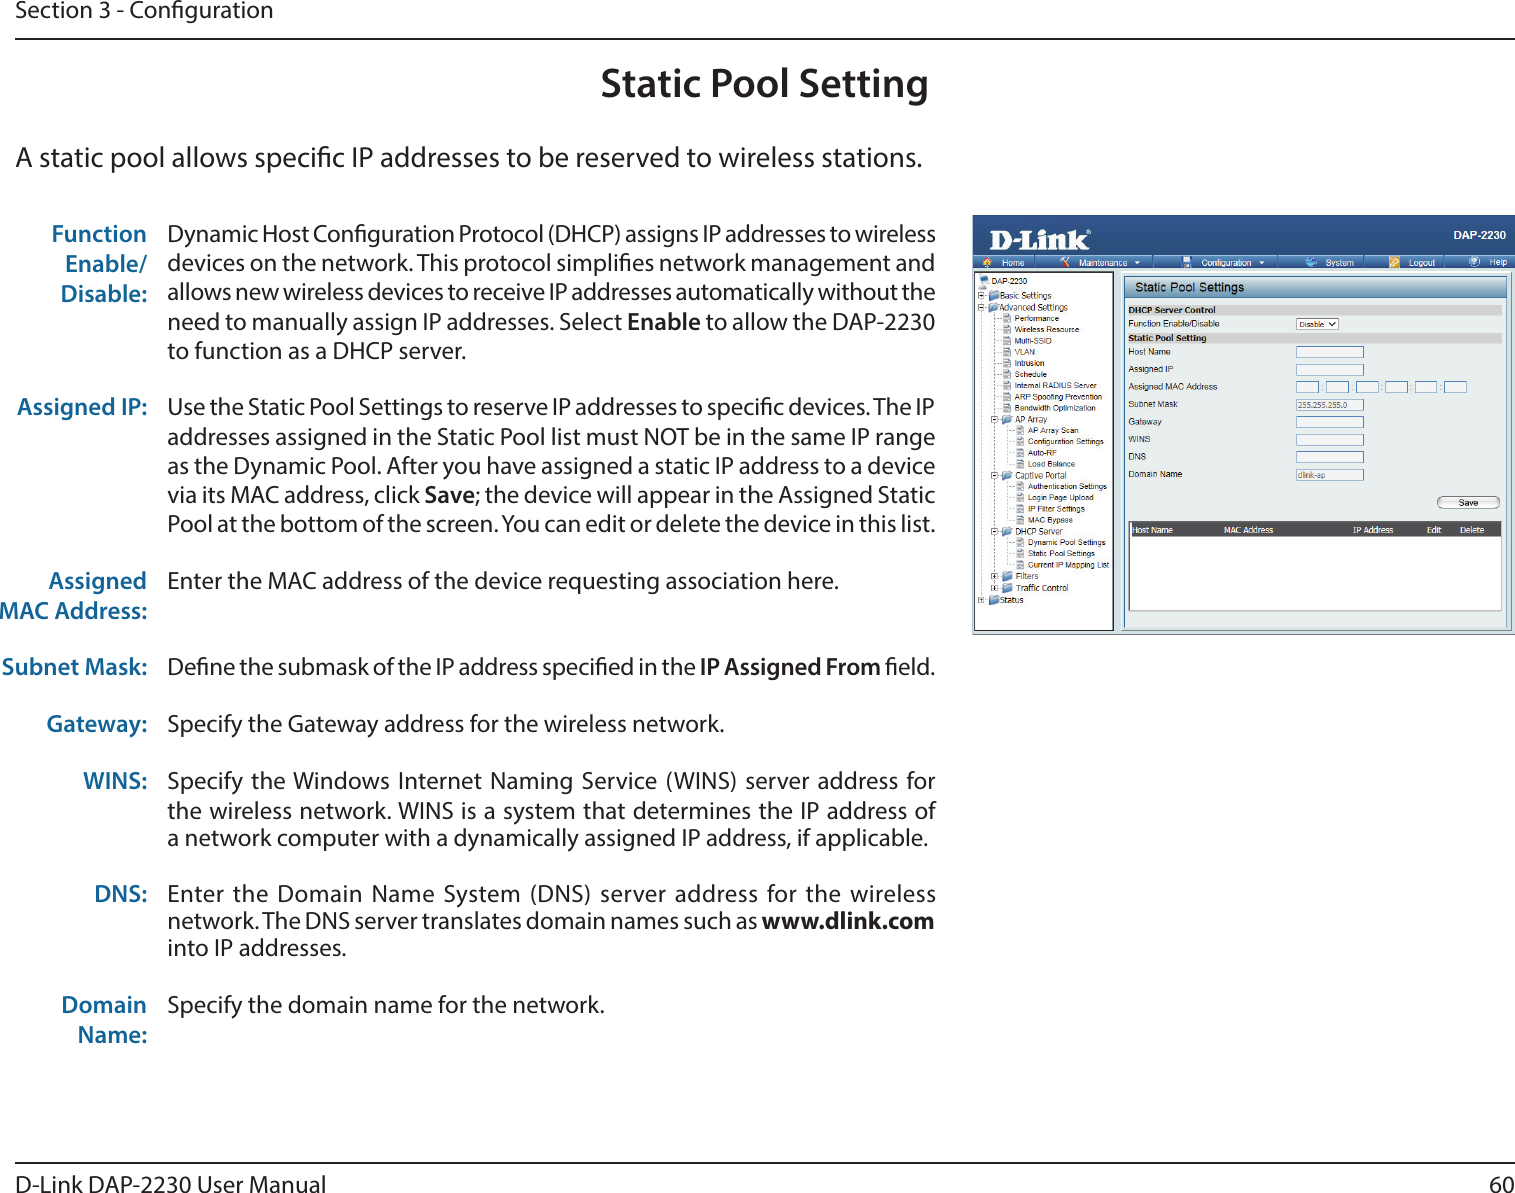 60D-Link DAP-2230 User ManualSection 3 - CongurationStatic Pool SettingA static pool allows specic IP addresses to be reserved to wireless stations.Function Enable/Disable:Dynamic Host Conguration Protocol (DHCP) assigns IP addresses to wireless devices on the network. This protocol simplies network management and allows new wireless devices to receive IP addresses automatically without the need to manually assign IP addresses. Select Enable to allow the DAP-2230 to function as a DHCP server. Assigned IP: Use the Static Pool Settings to reserve IP addresses to specic devices. The IP addresses assigned in the Static Pool list must NOT be in the same IP range as the Dynamic Pool. After you have assigned a static IP address to a device via its MAC address, click Save; the device will appear in the Assigned Static Pool at the bottom of the screen. You can edit or delete the device in this list. Assigned MAC Address:Enter the MAC address of the device requesting association here.Subnet Mask: Dene the submask of the IP address specied in the IP Assigned From eld. Gateway: Specify the Gateway address for the wireless network.WINS: Specify the Windows Internet Naming Service (WINS) server address for the wireless network. WINS is a system that determines the IP address of a network computer with a dynamically assigned IP address, if applicable.DNS: Enter the Domain Name System (DNS) server address for the wireless network. The DNS server translates domain names such as www.dlink.com into IP addresses.Domain Name:Specify the domain name for the network.